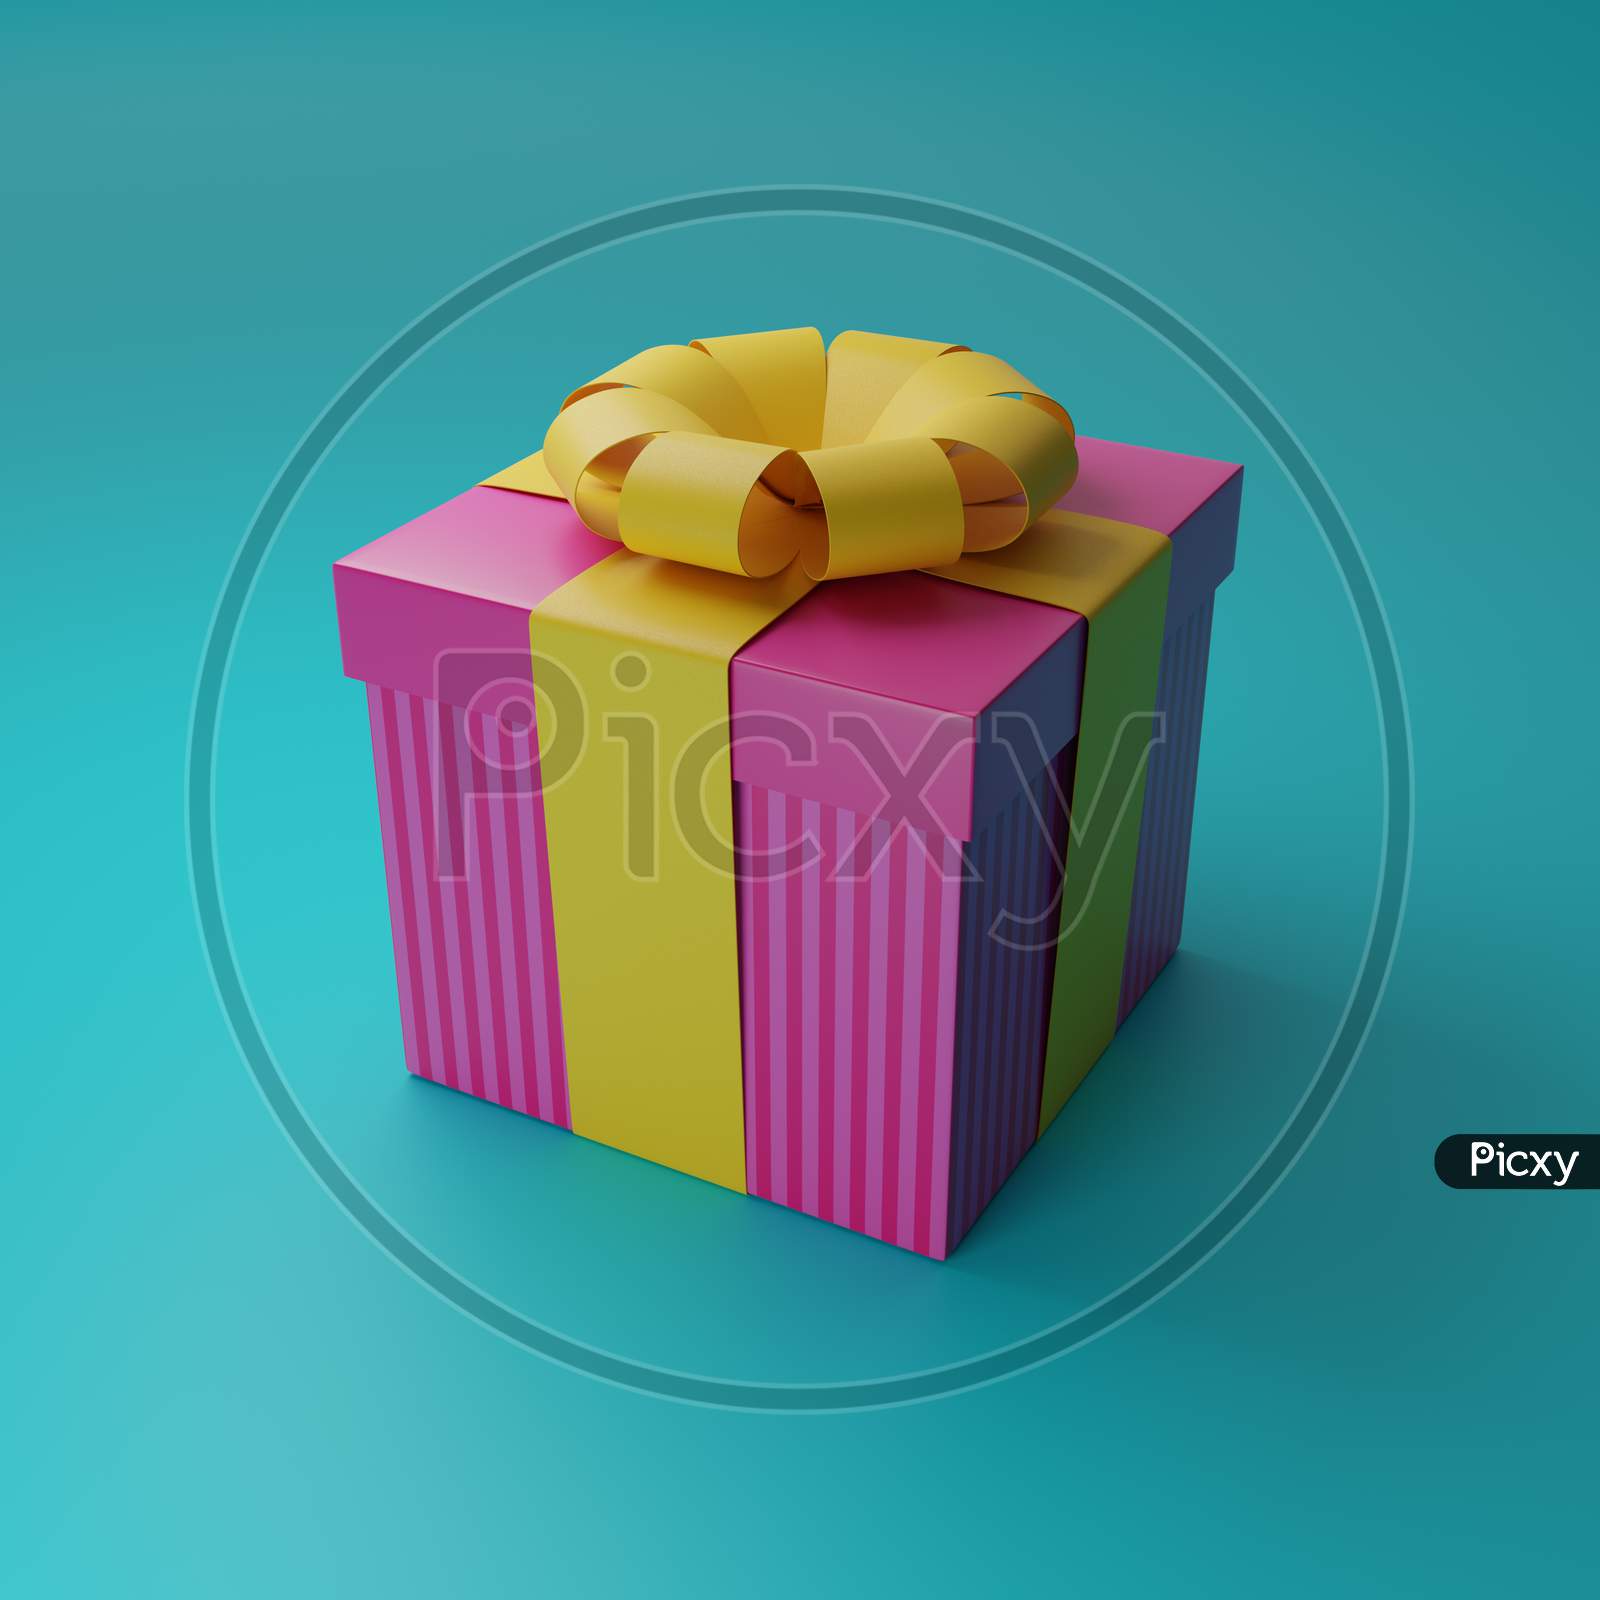 3D Render Of A Pink Gift Box With A Golden Ribbon On A Blue Background